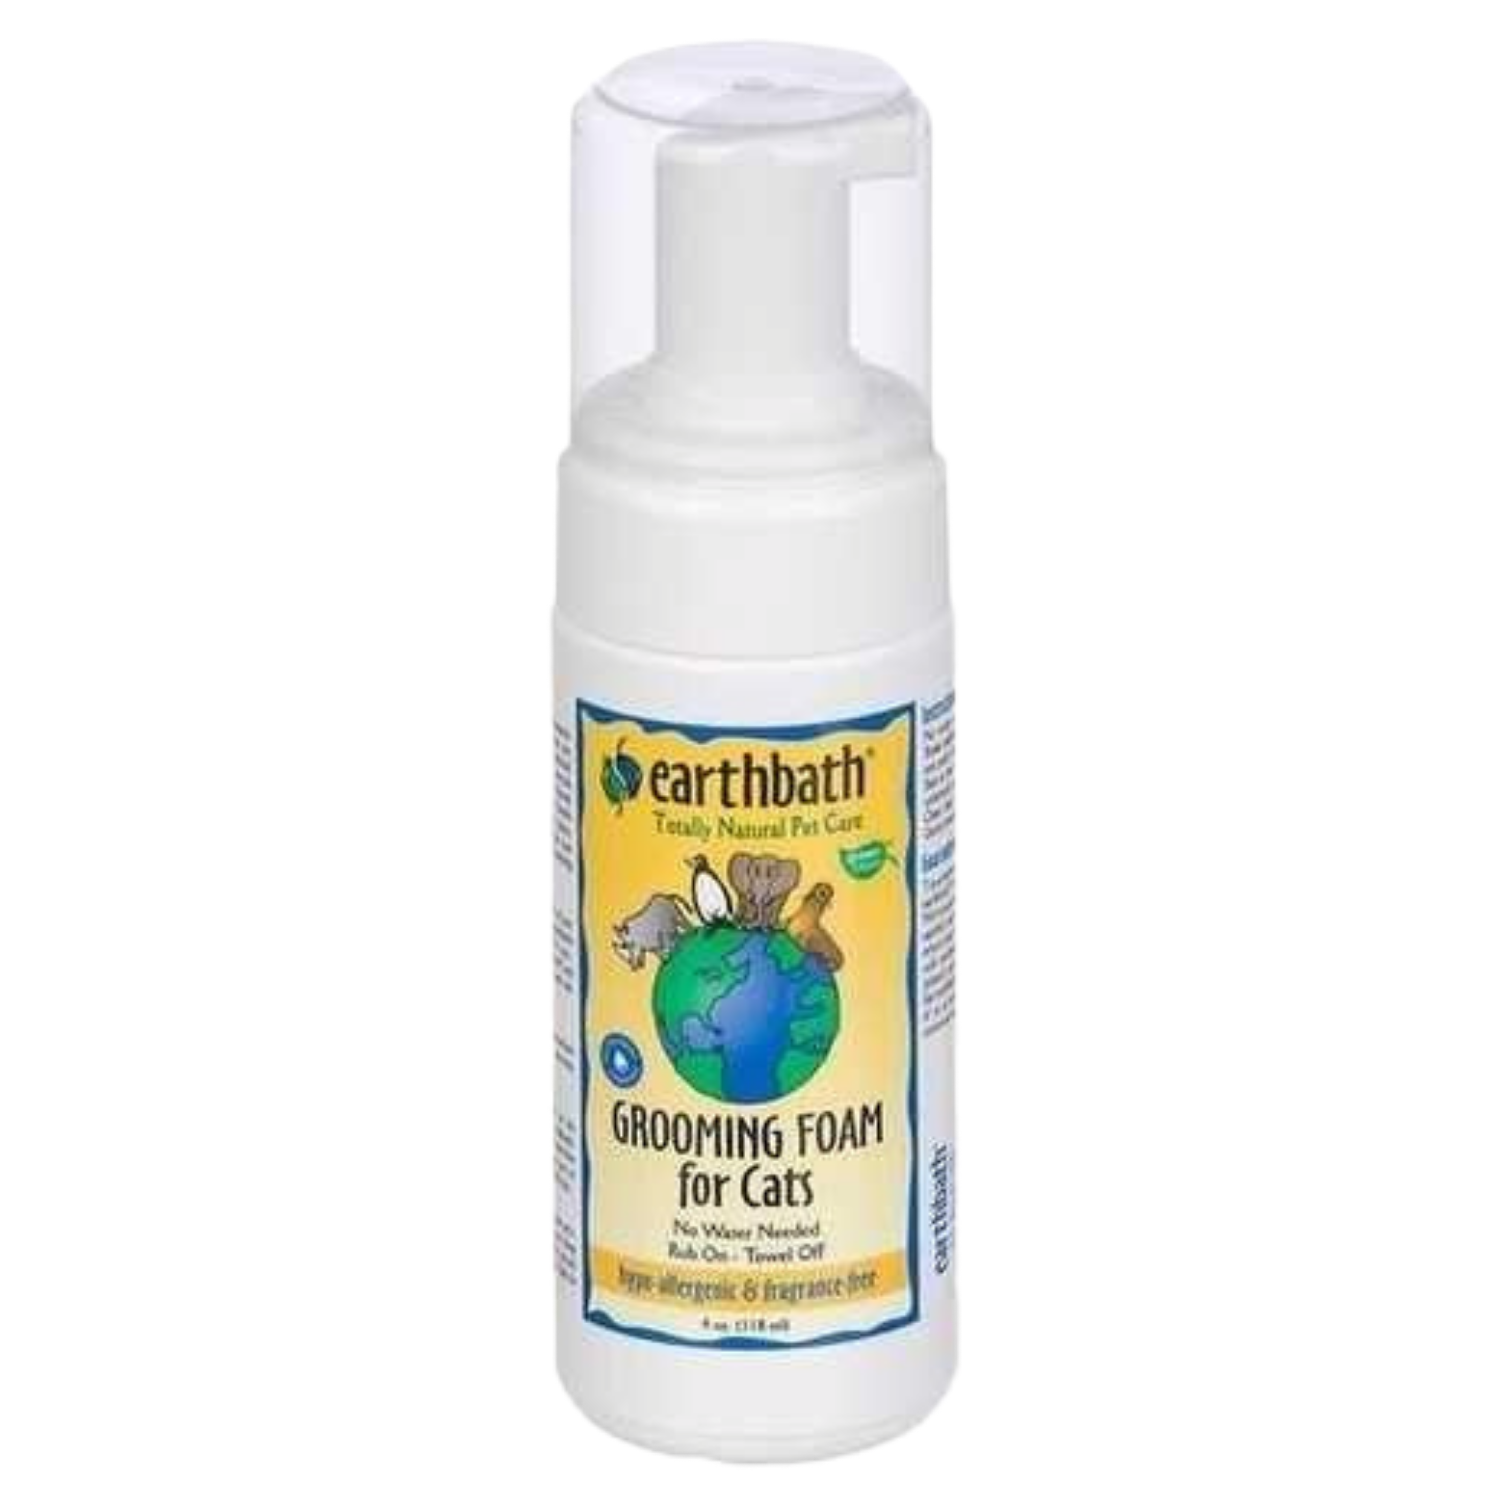 Earthbath Hypo-Allergenic Grooming Foam for Cats (Fragrance Free) - 118ml